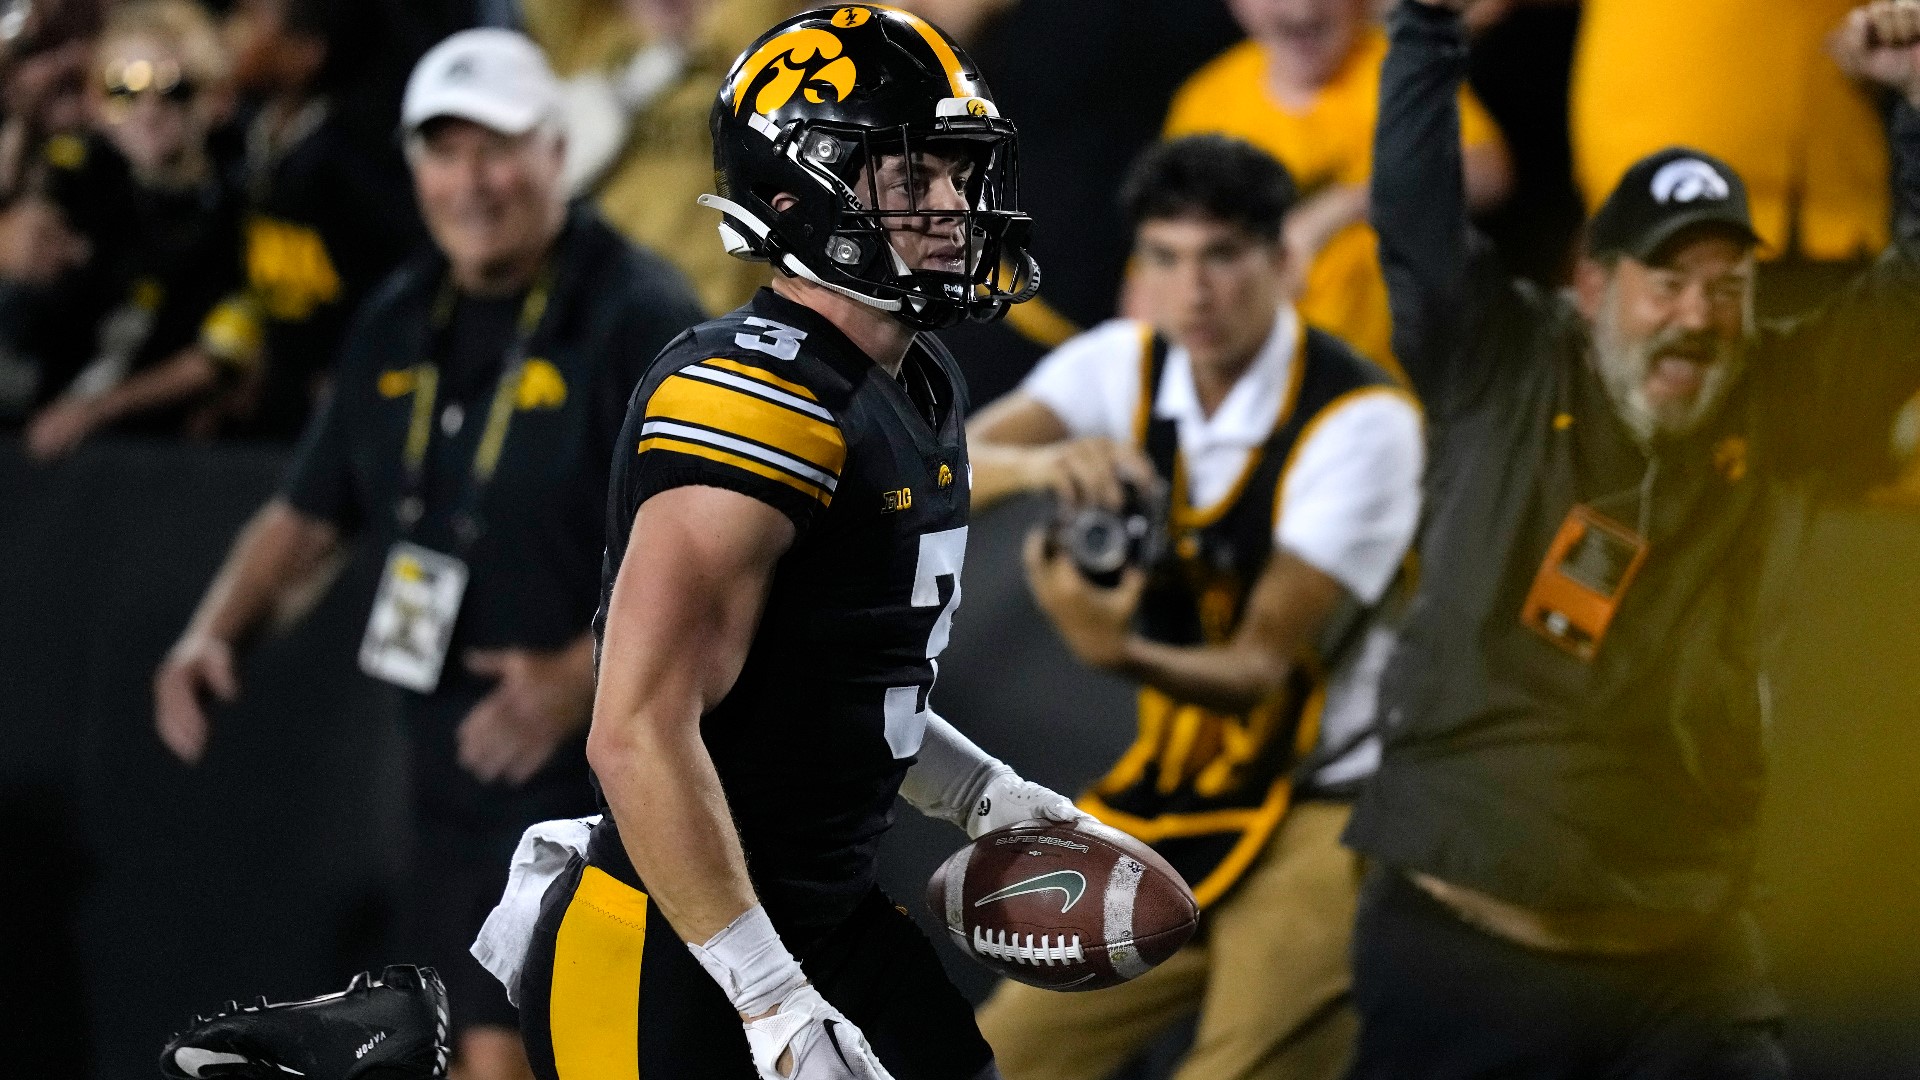 Cooper DeJean’s 70-yard punt return with less than four minutes to play helped give Iowa a 26-16 win over Michigan State.